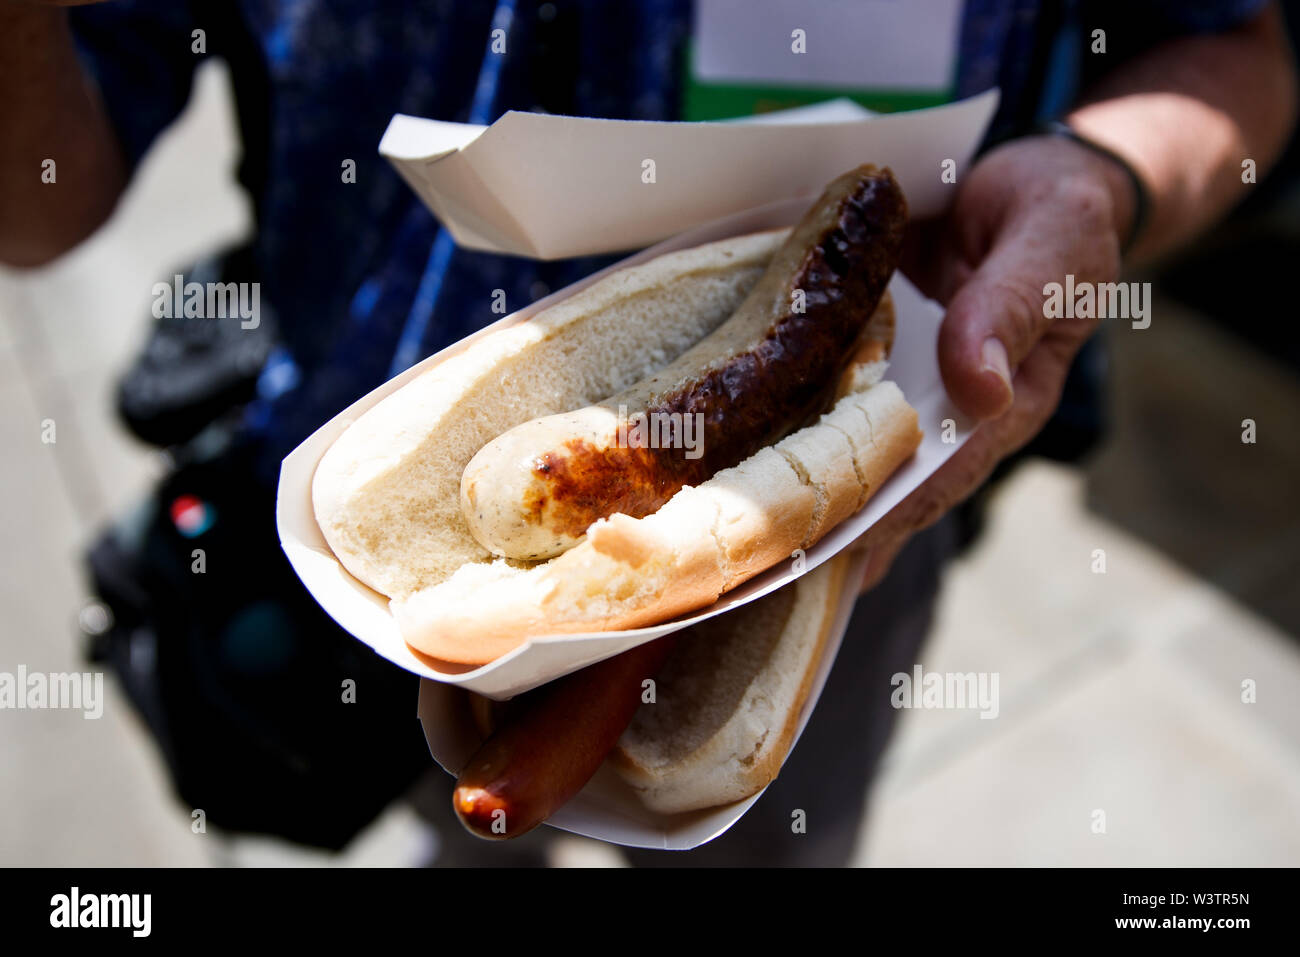 Washington, USA. 17th July, 2019. A hot dog is seen during the annual Hot Dog Lunch event at the Rayburn House Office Building on Capitol Hill in Washington, DC, the United States, on July 17, 2019. The event was held here on Wednesday in celebration of the National Hot Dog Day. Credit: Ting Shen/Xinhua/Alamy Live News Stock Photo